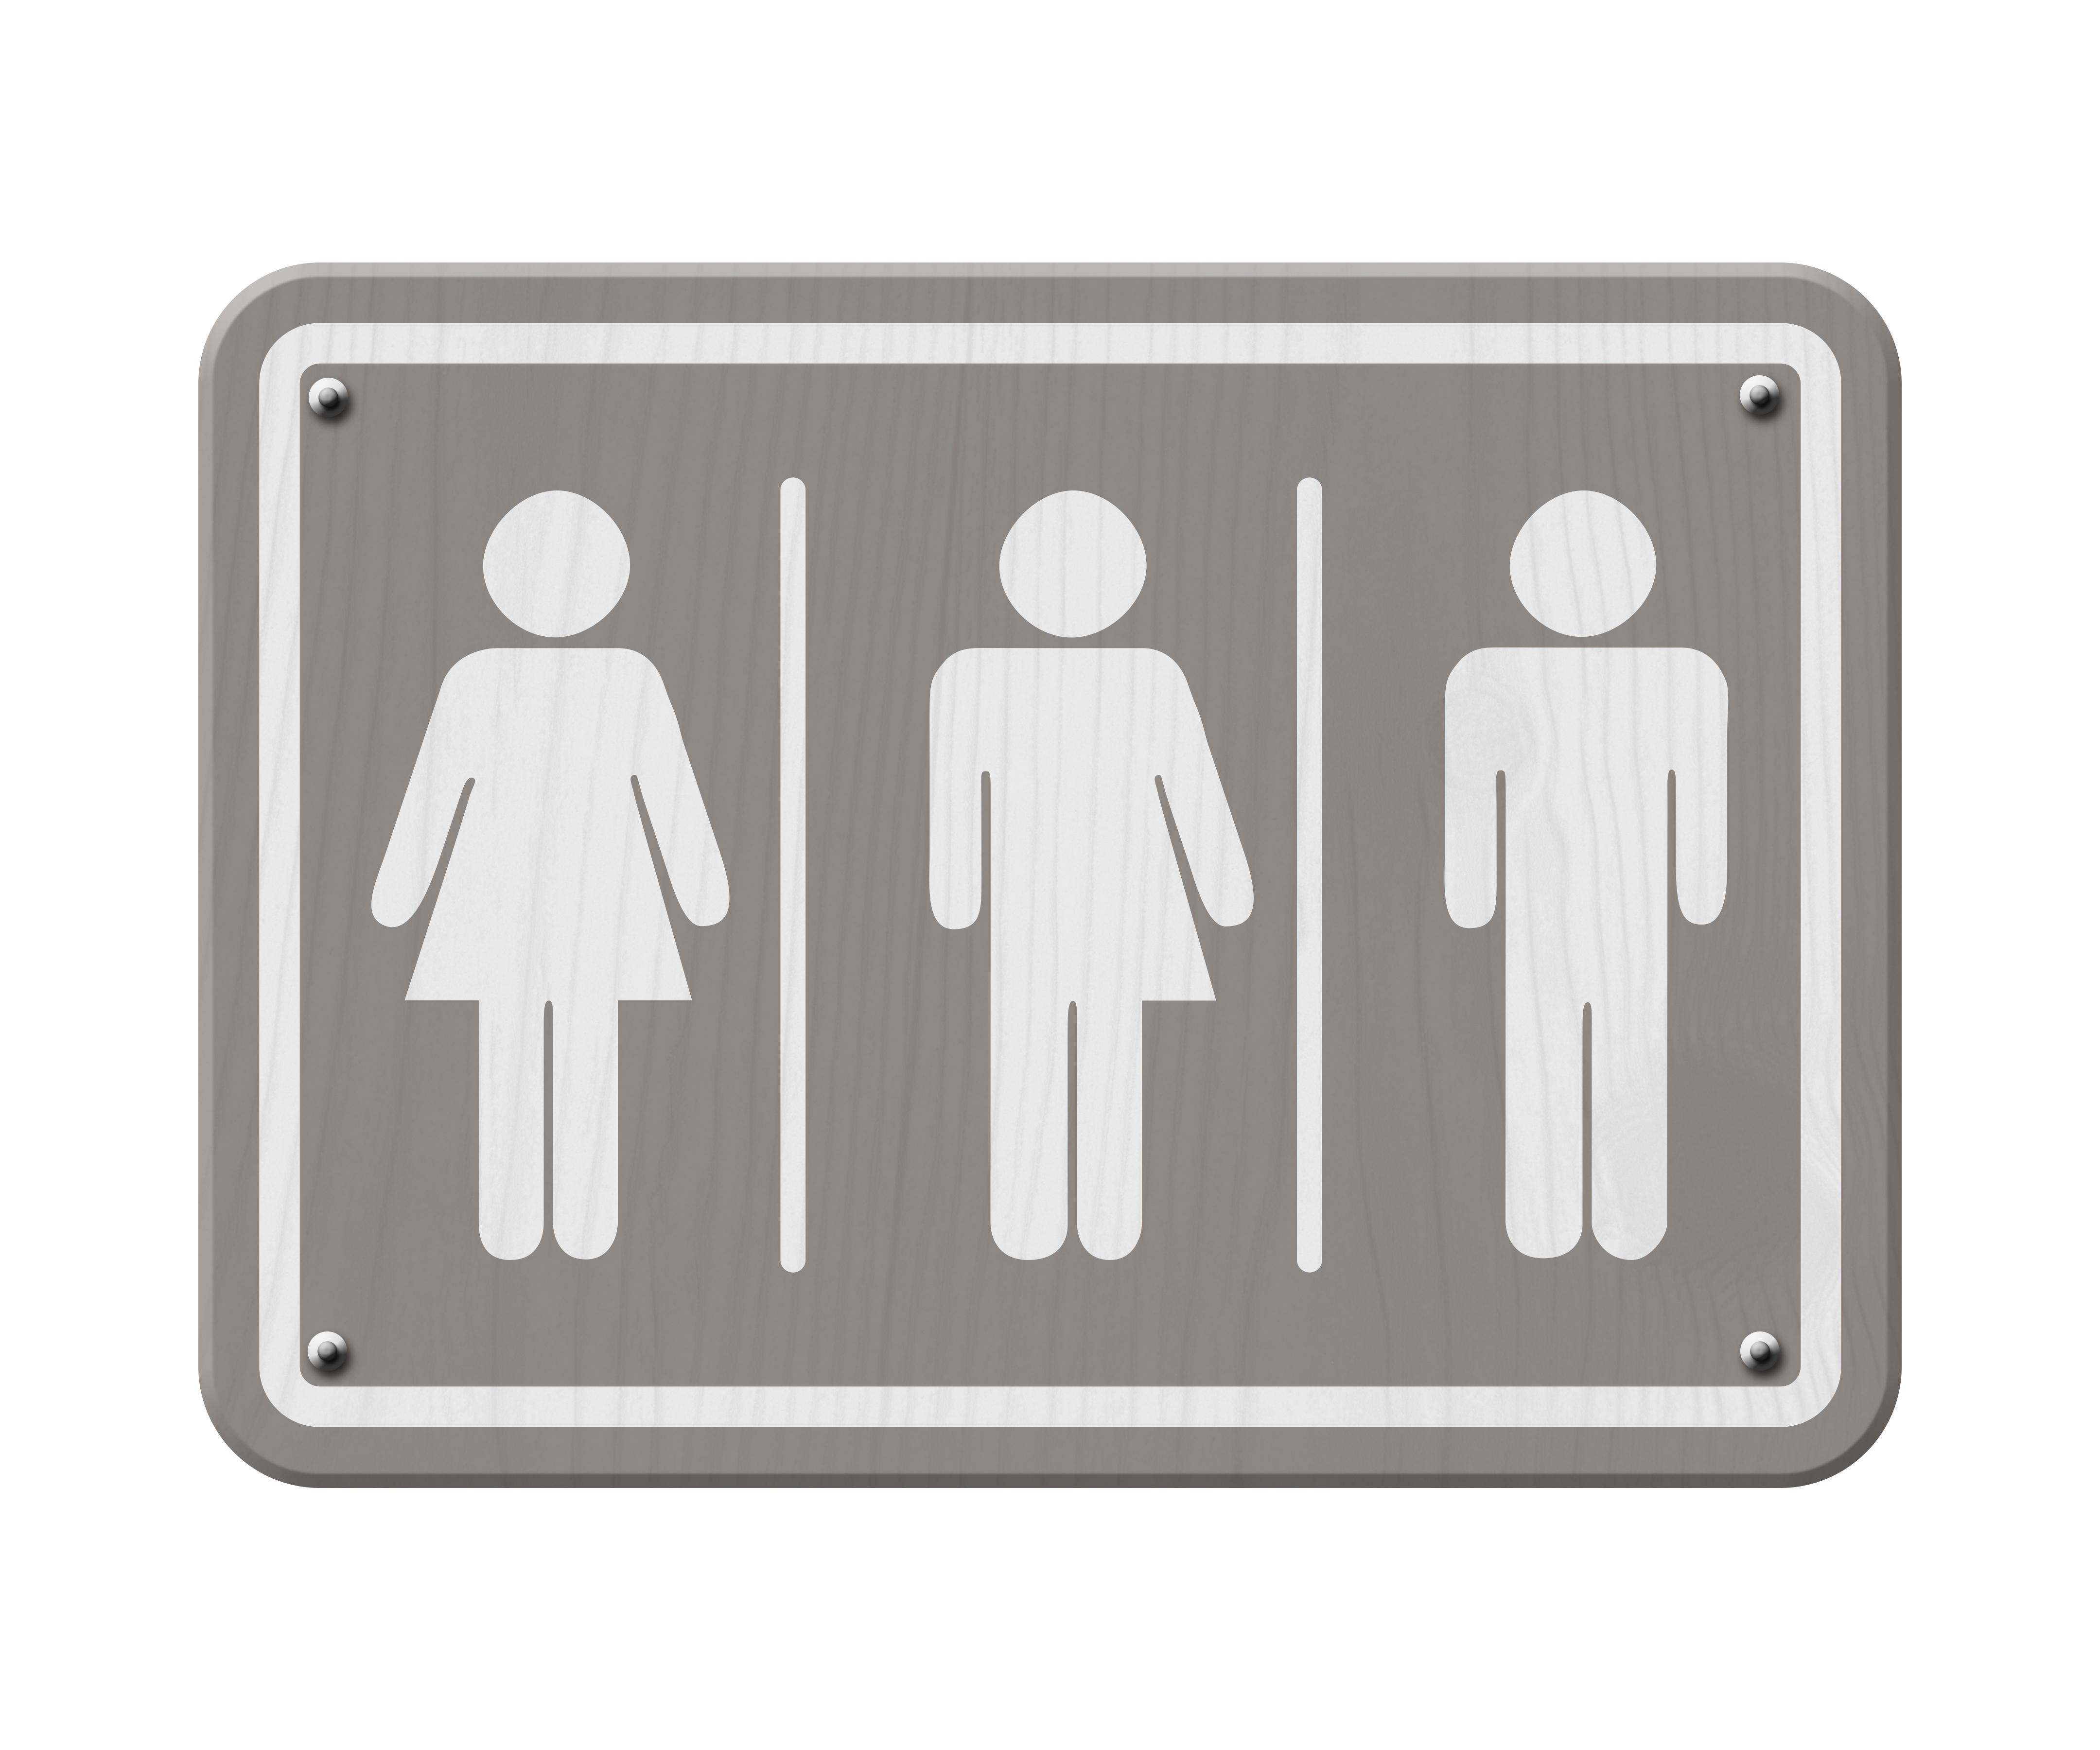 Transgender and use of public bathrooms